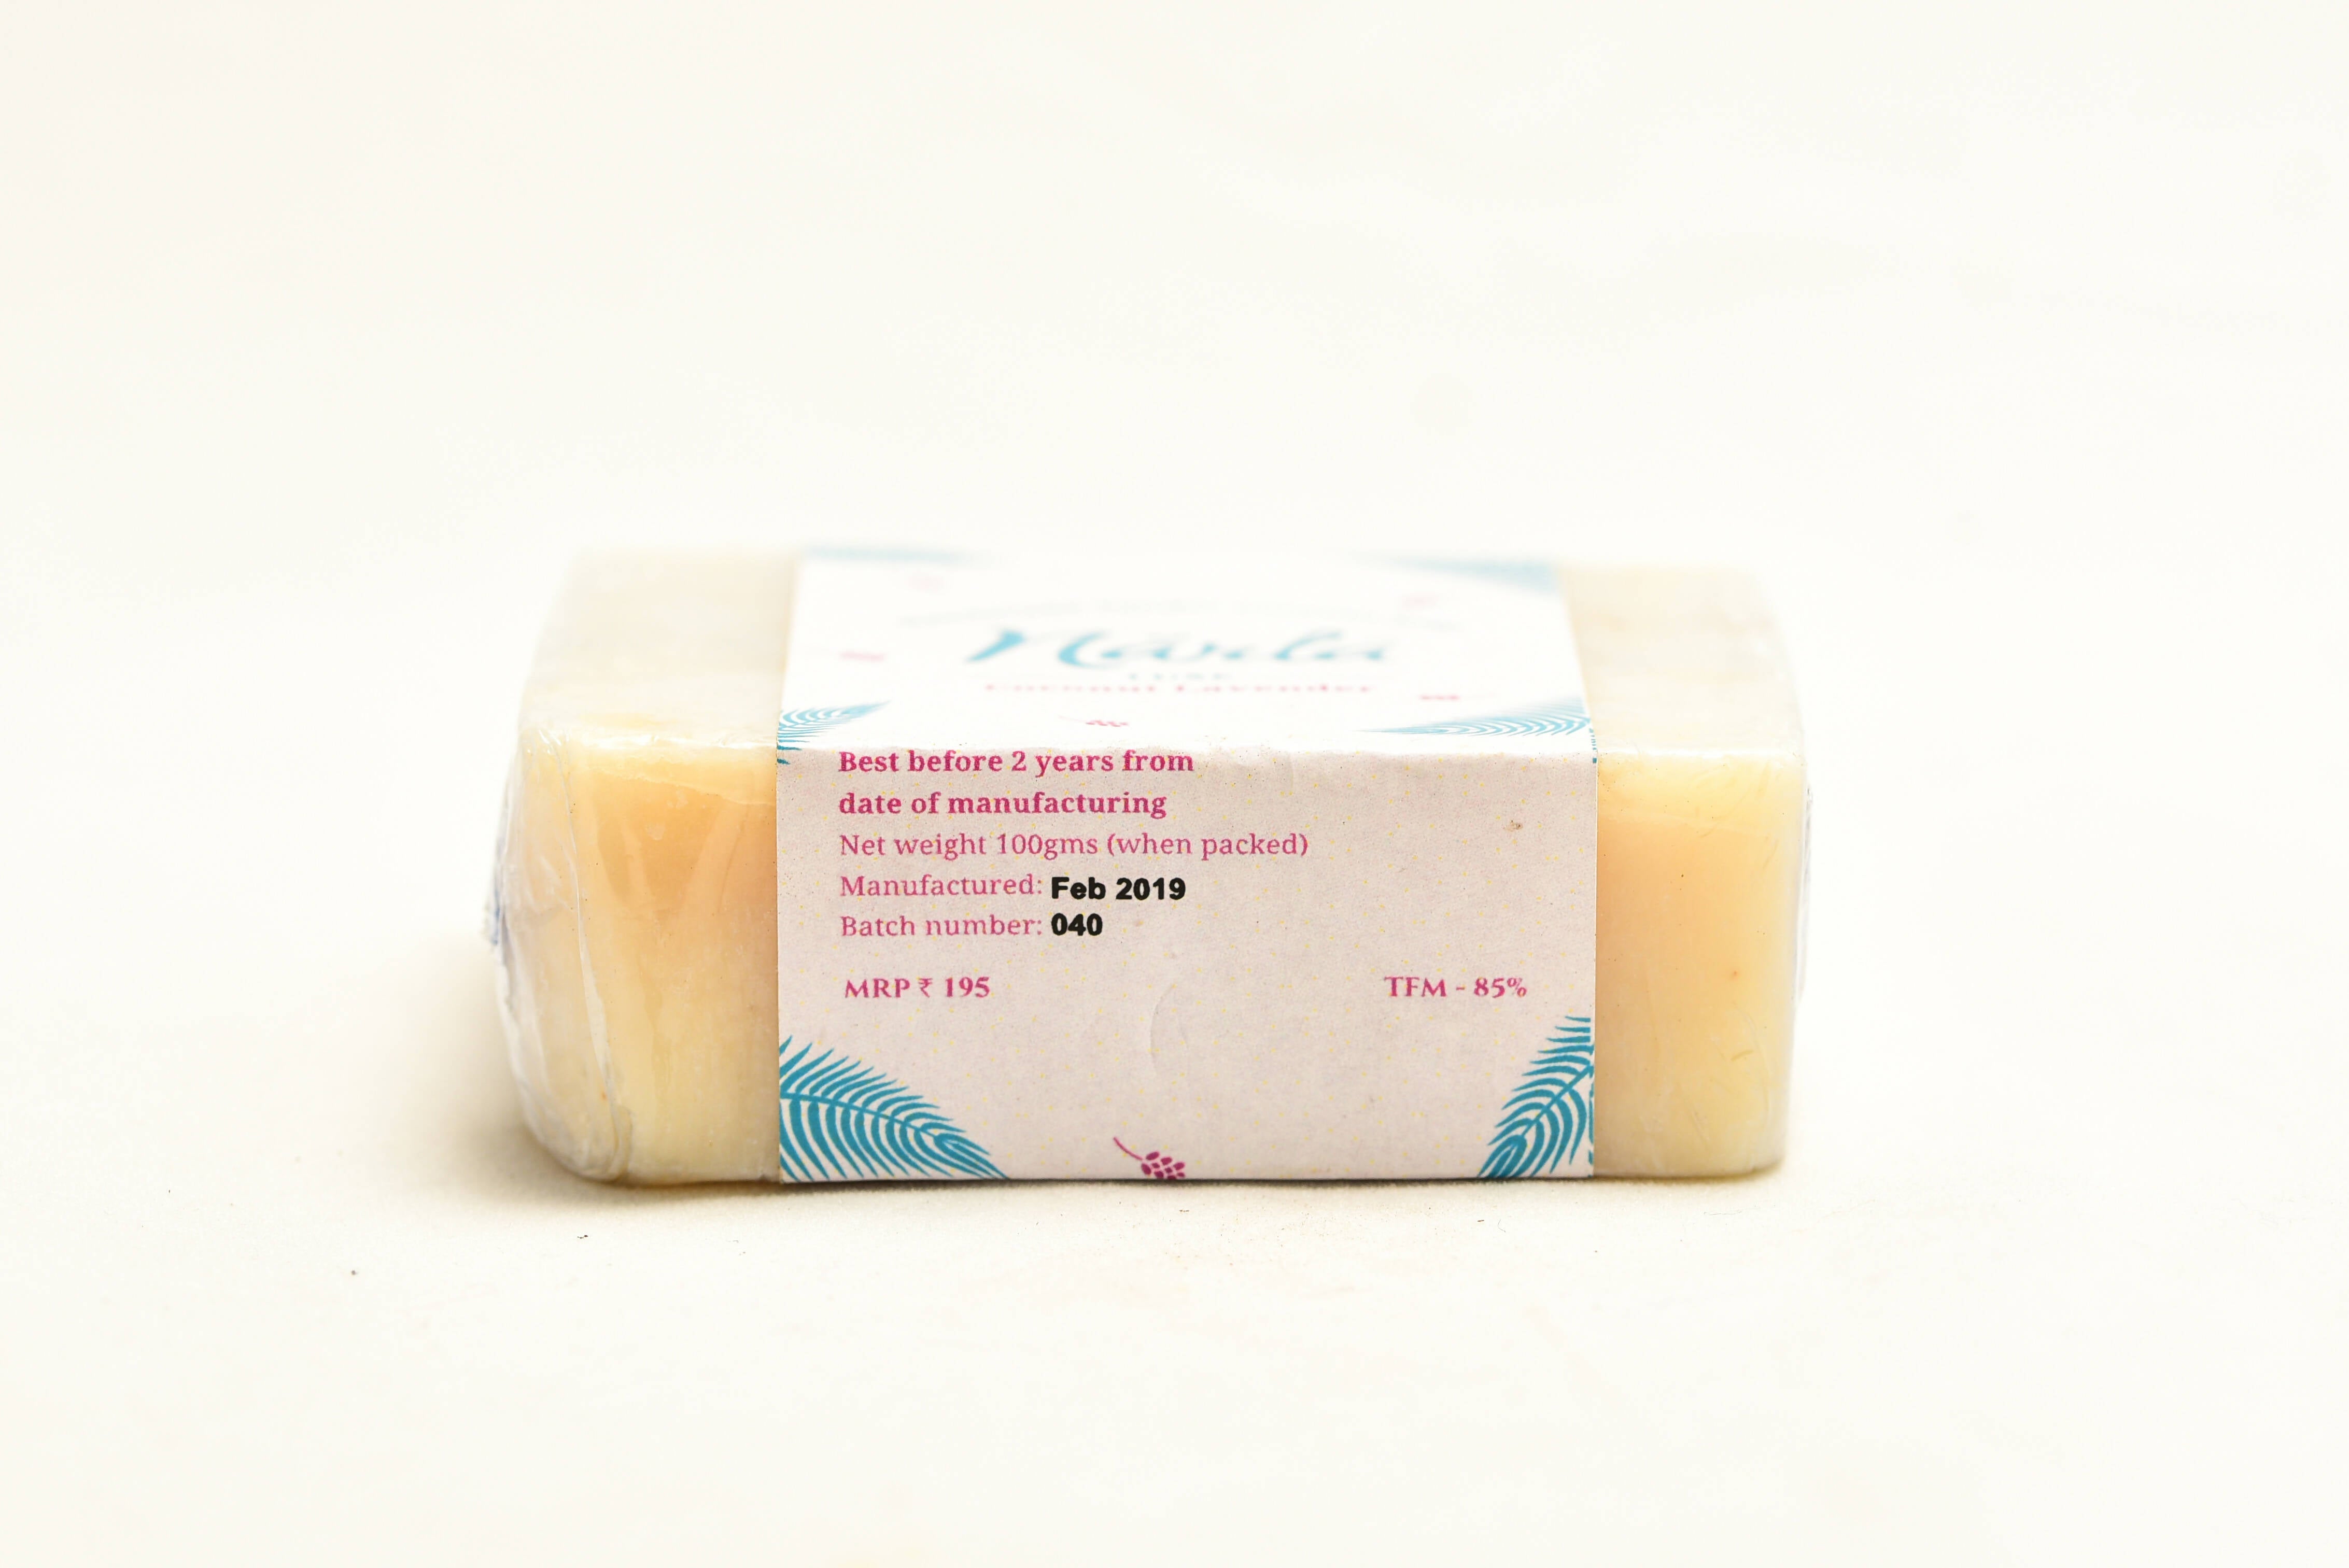 Narla Handcrafted Soap - Coconut Lavender- 100 gm Wemy Store